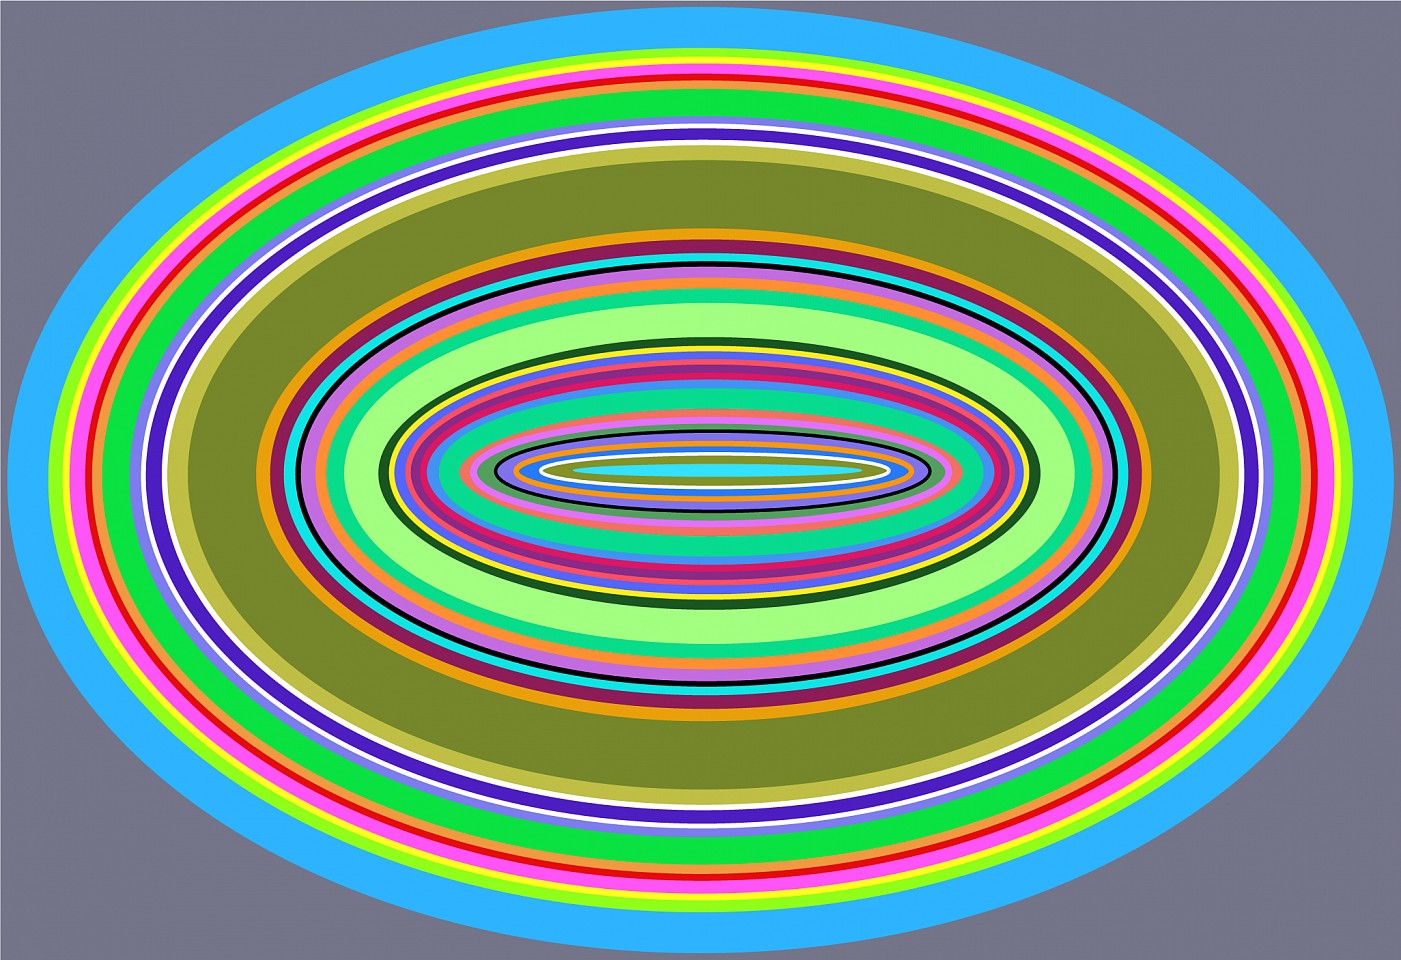 Dane Albert, Circles #27 Dusk, 2023
Acrylic on canvas (Concept), 48 x 72 in. (121.9 x 182.9 cm)
Series of colored lines and shapes in multiple configurations
DA.2023-027-dusk